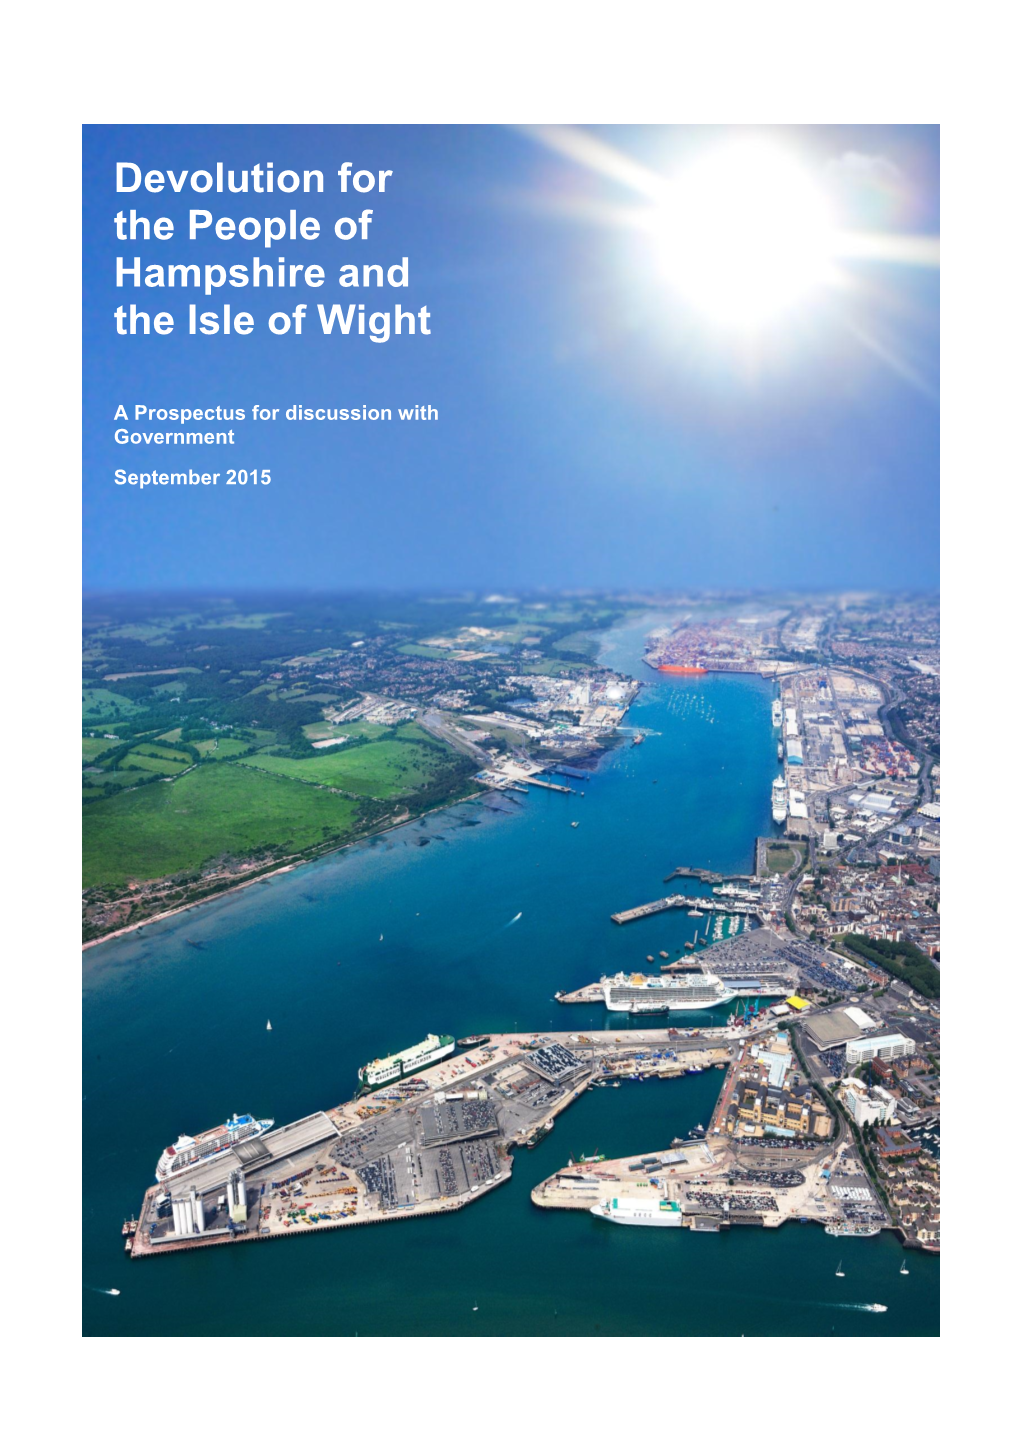 Hampshire and Isle of Wight Devolution Prospectus September 2015